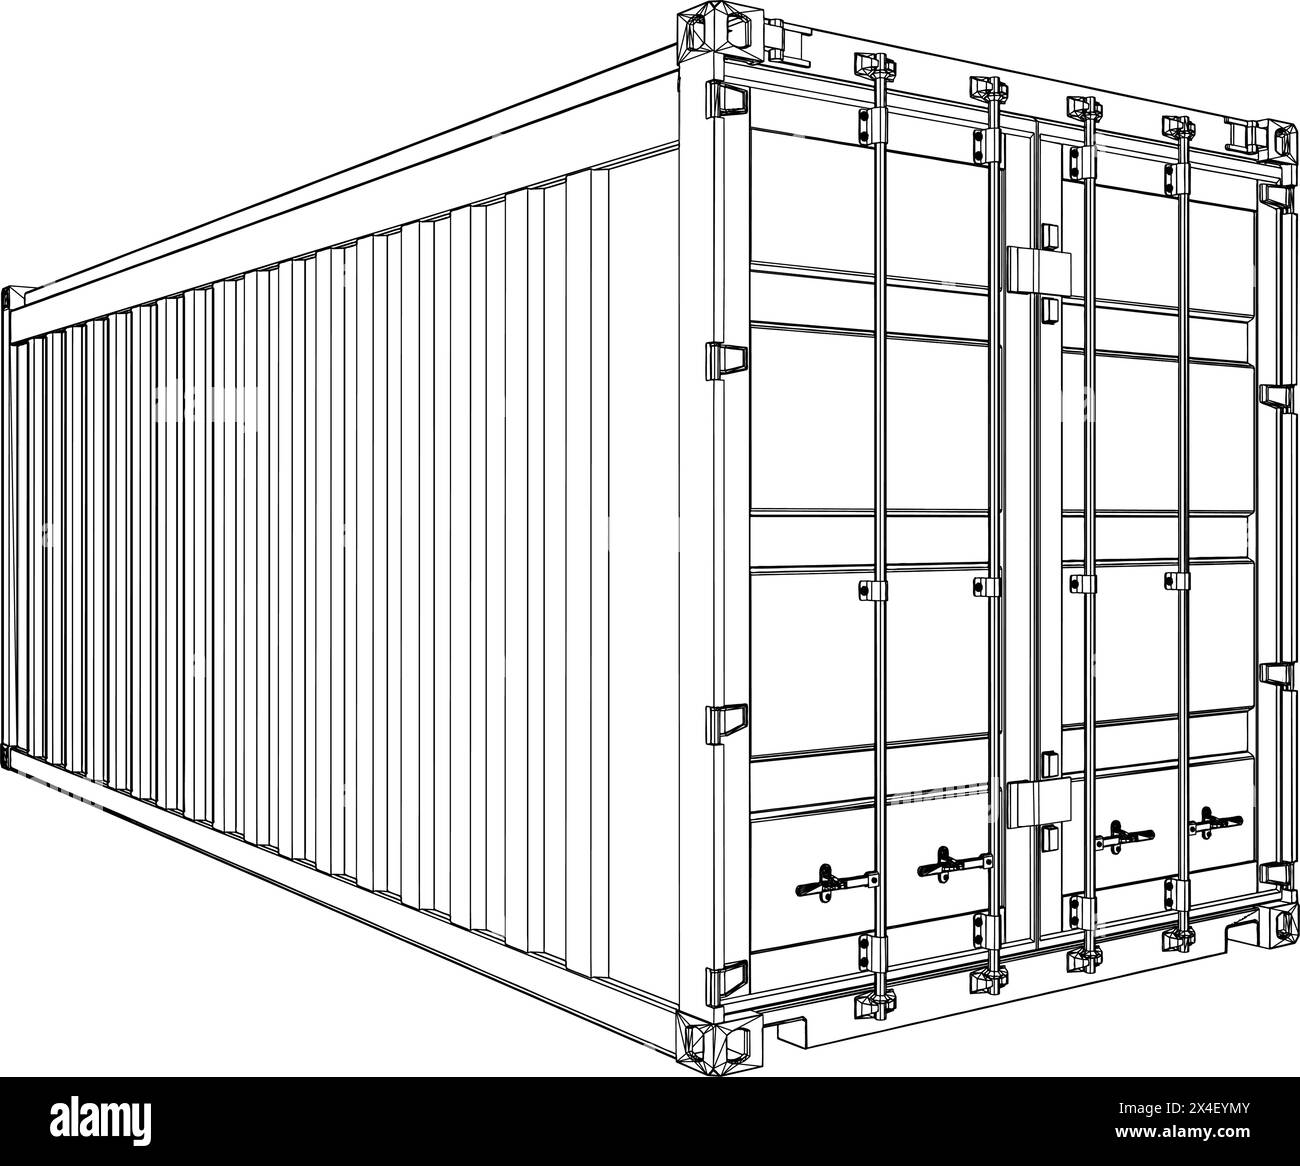 Shipping Container Vector. Illustration Isolated On White Background. Stock Vector